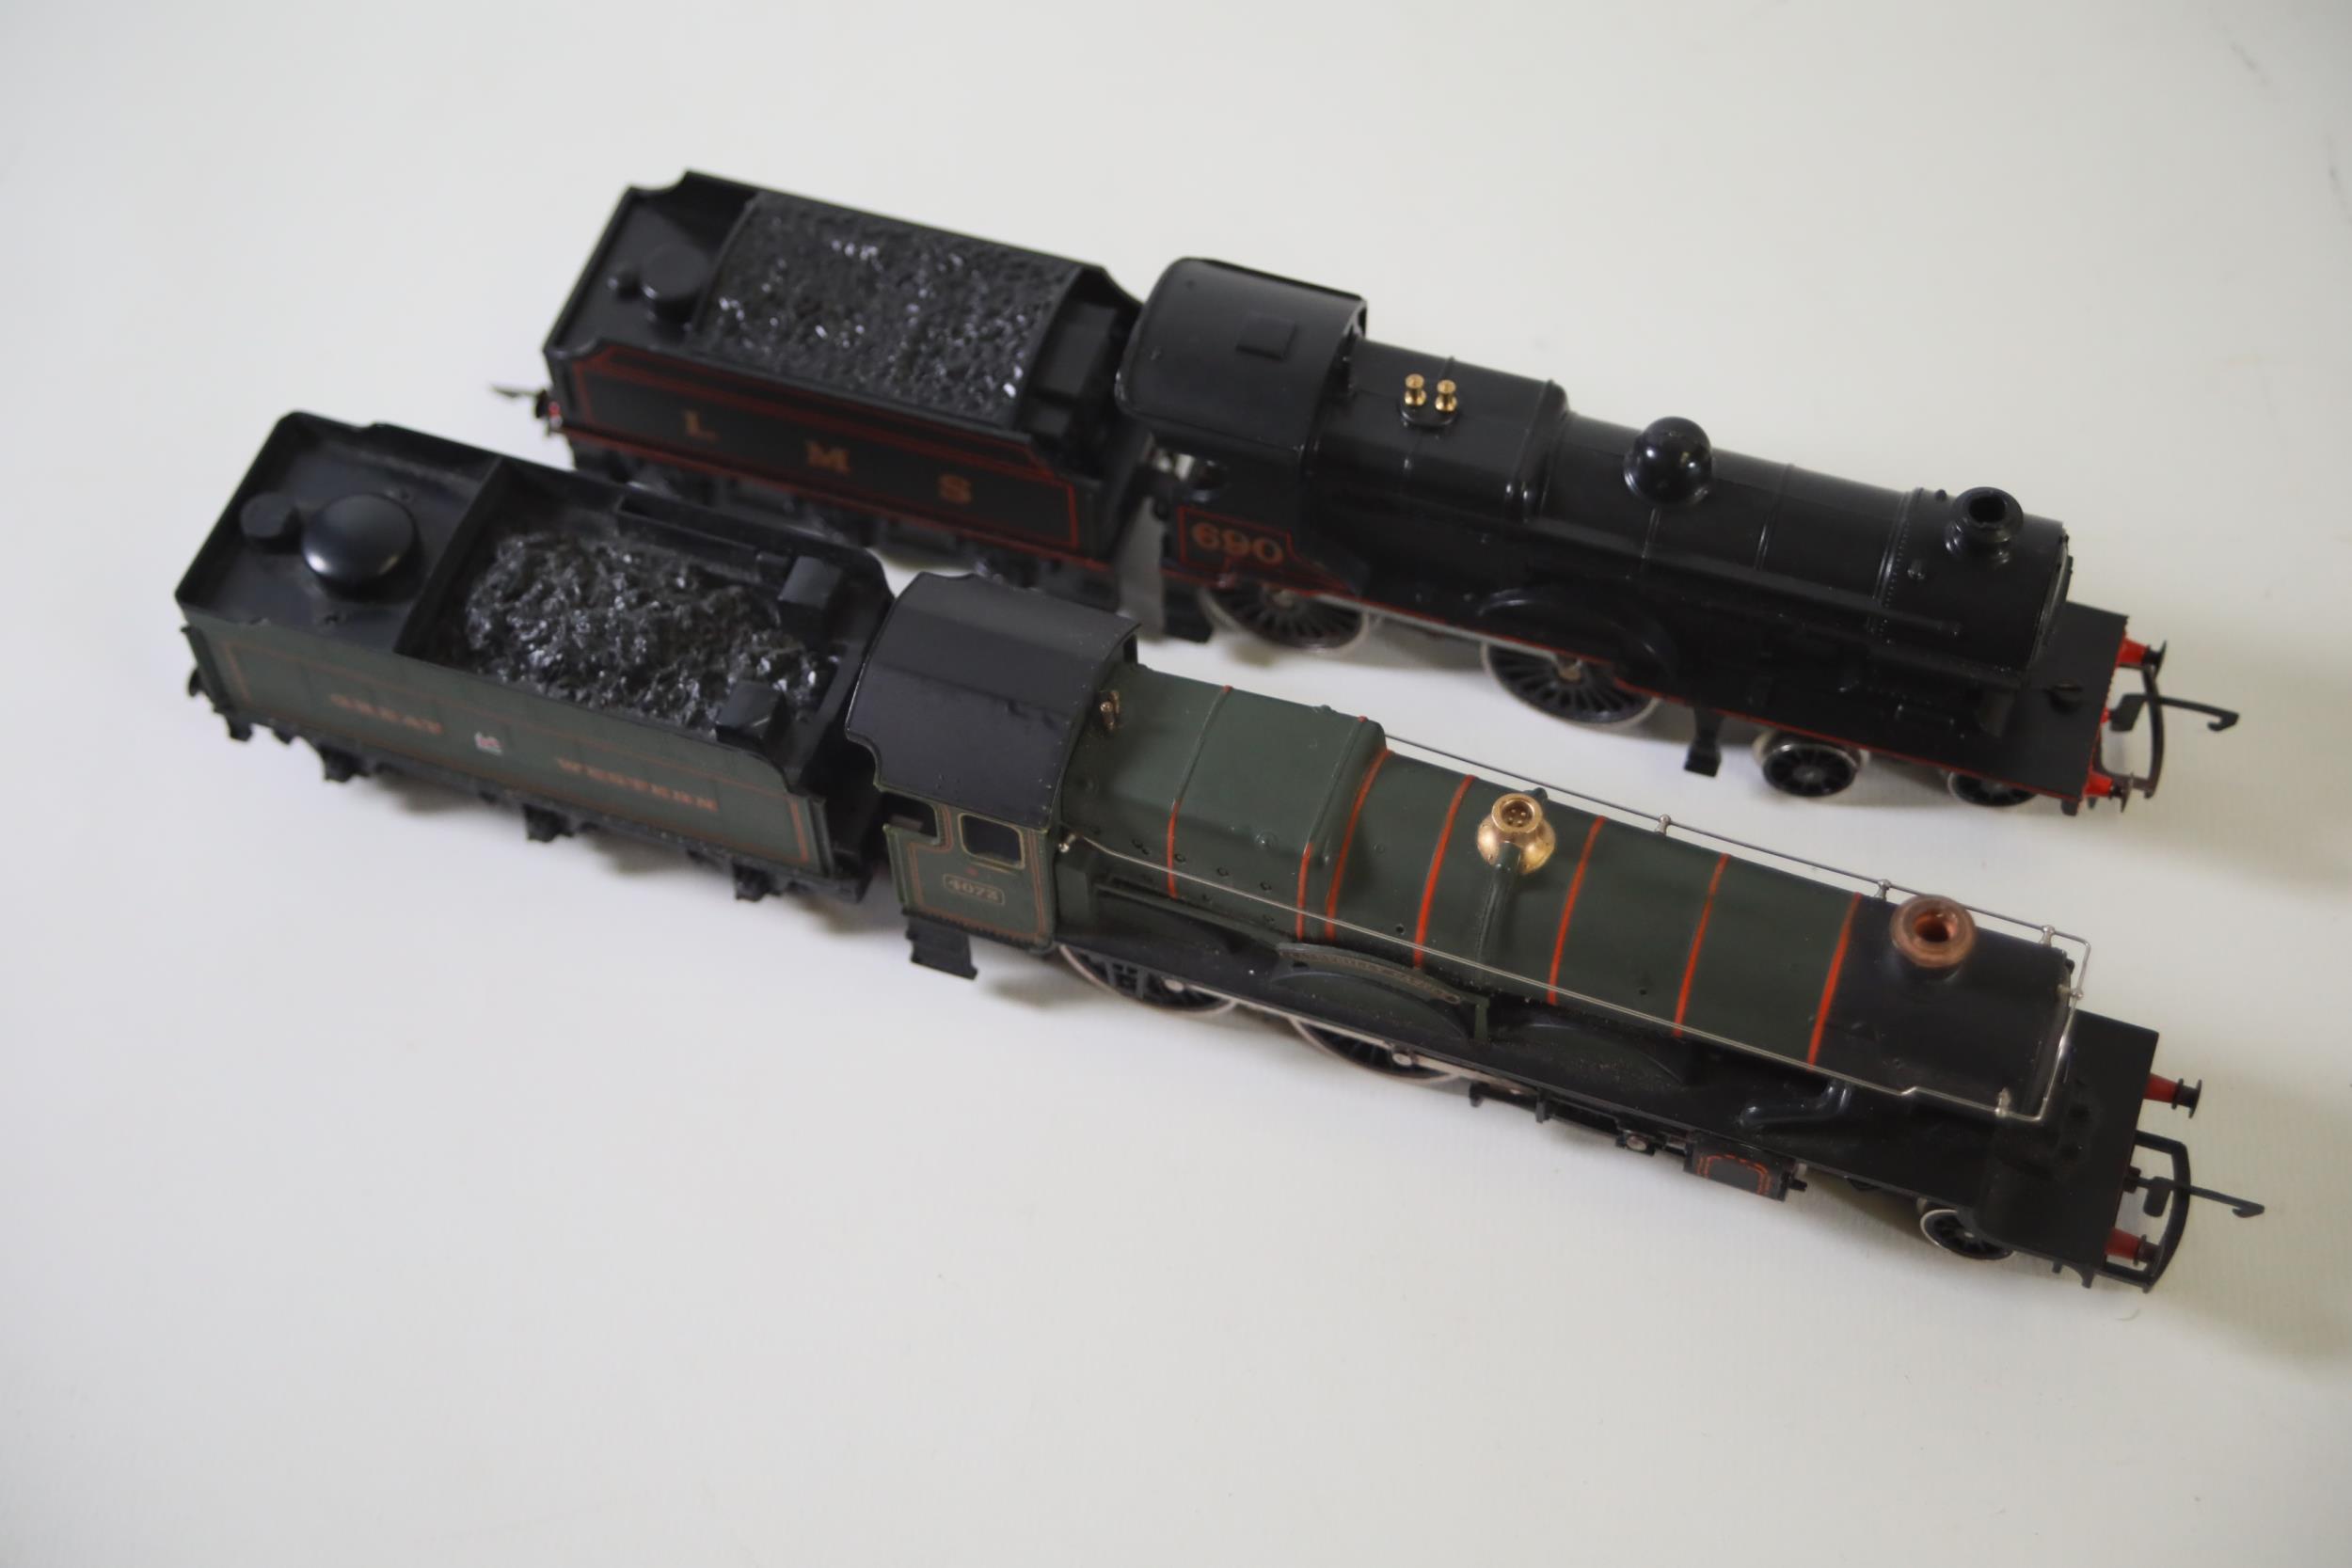 2 OO Gauge Locomotives 1 Hornby 1 Airfix LMS 690 Caerphilly Castle 4037 - Image 13 of 22